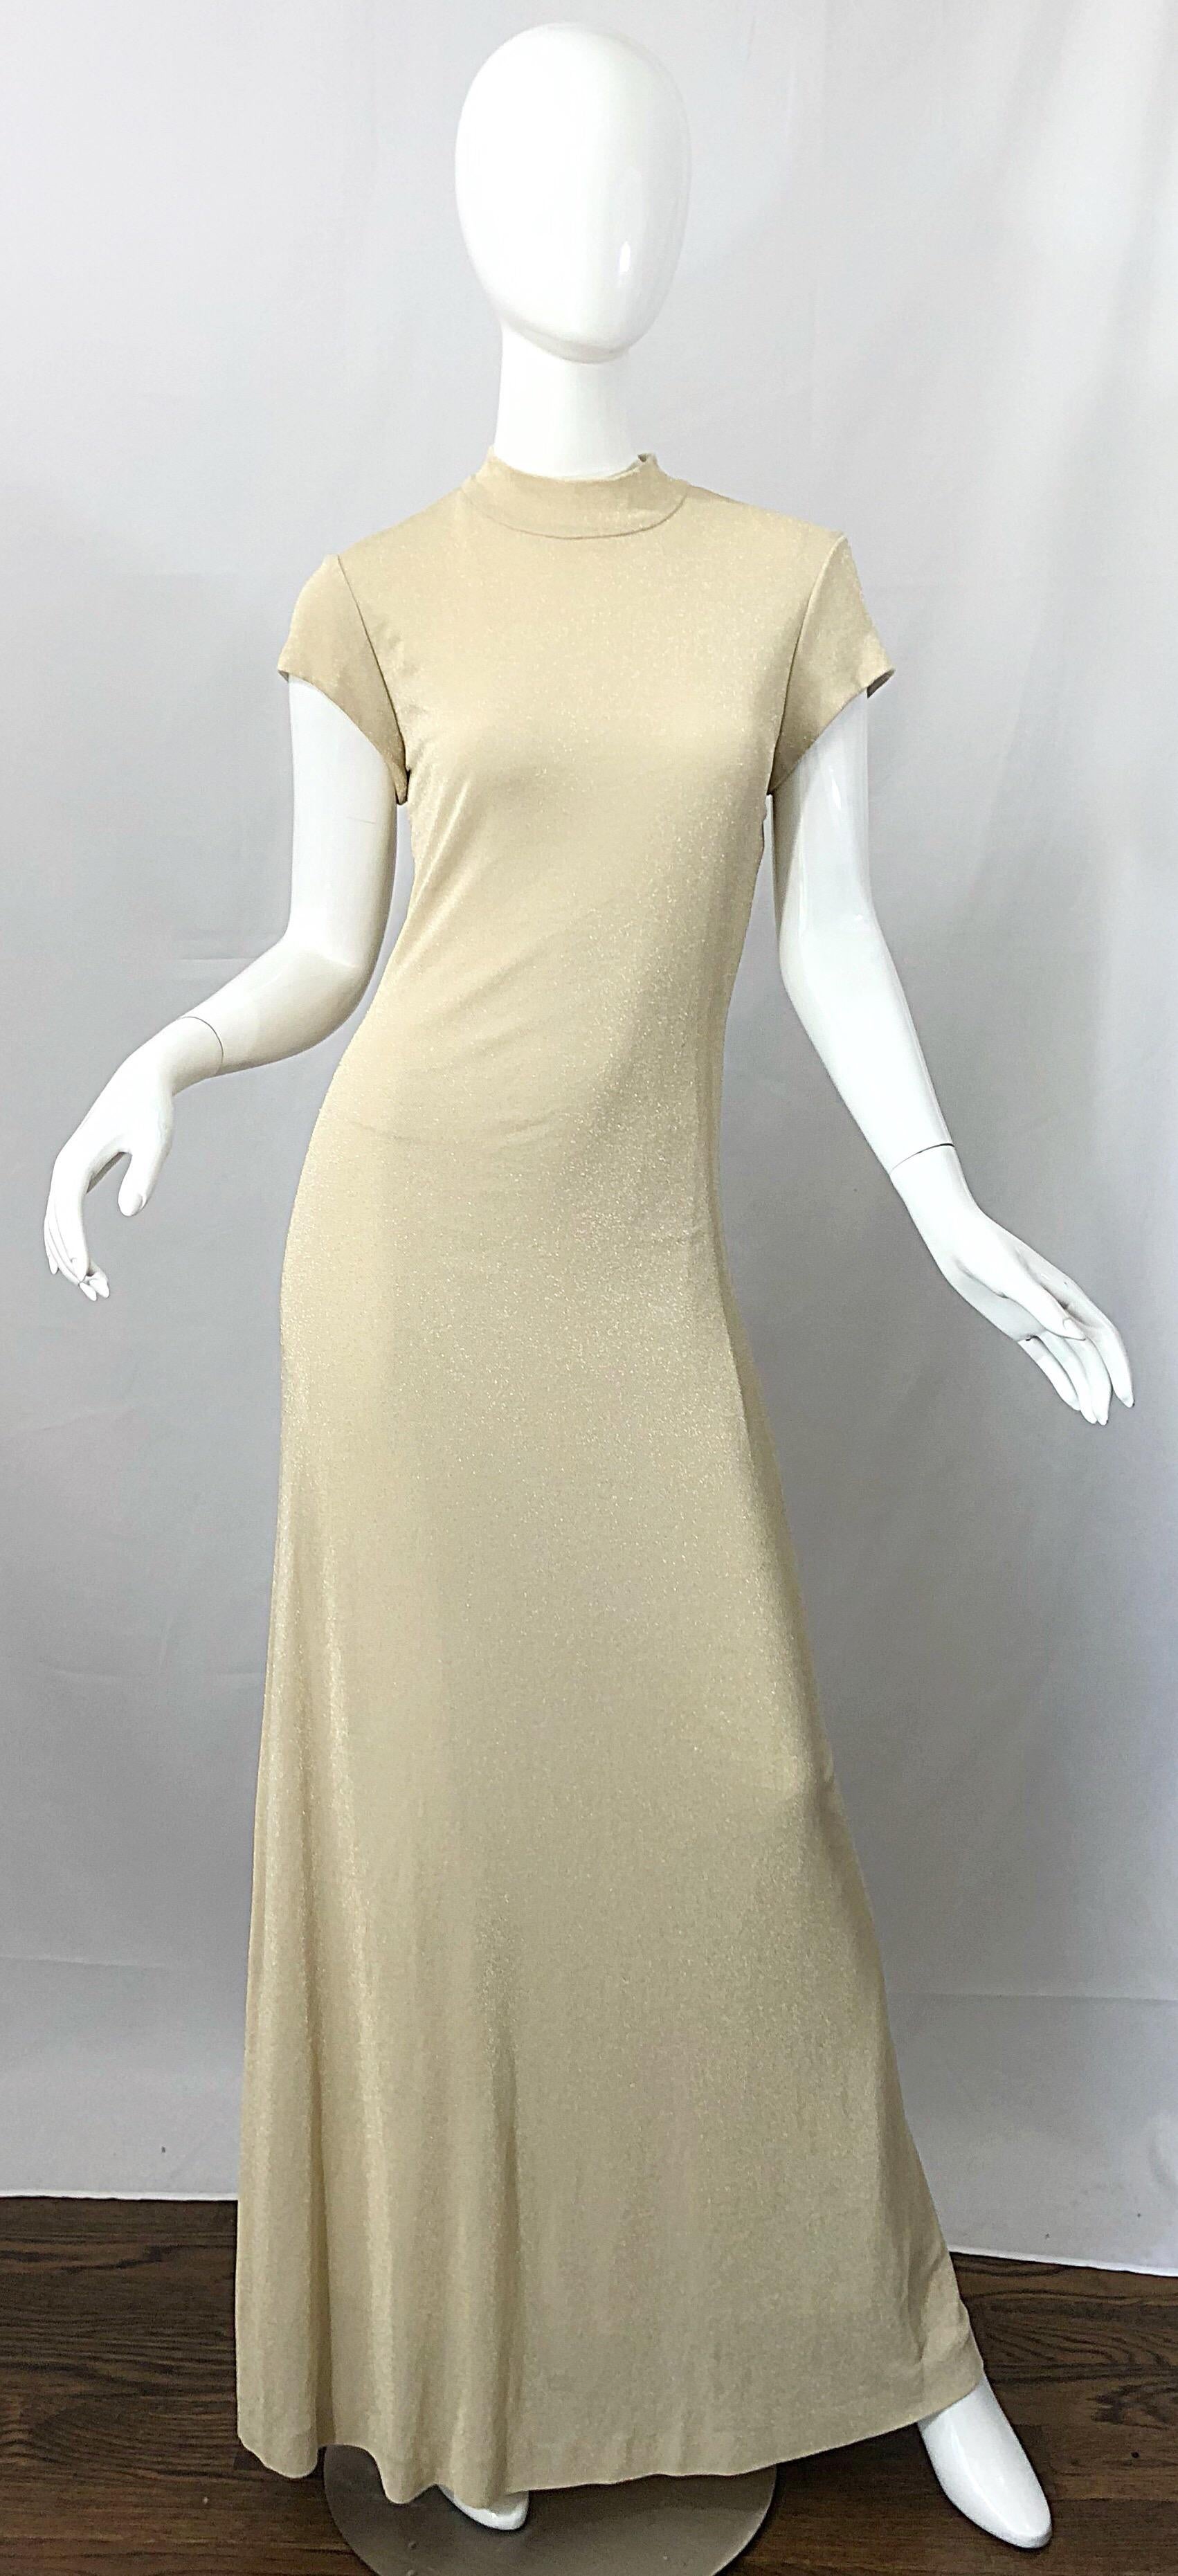 Beautiful vintage 90s HUEY WALTZER light pale gold high neck evening dress! Features a soft metallic jersey that stretches to fit. Lovely metallic light gold fabric gives off just the right amount of sheen, and is not flashy. Hidden zipper up the